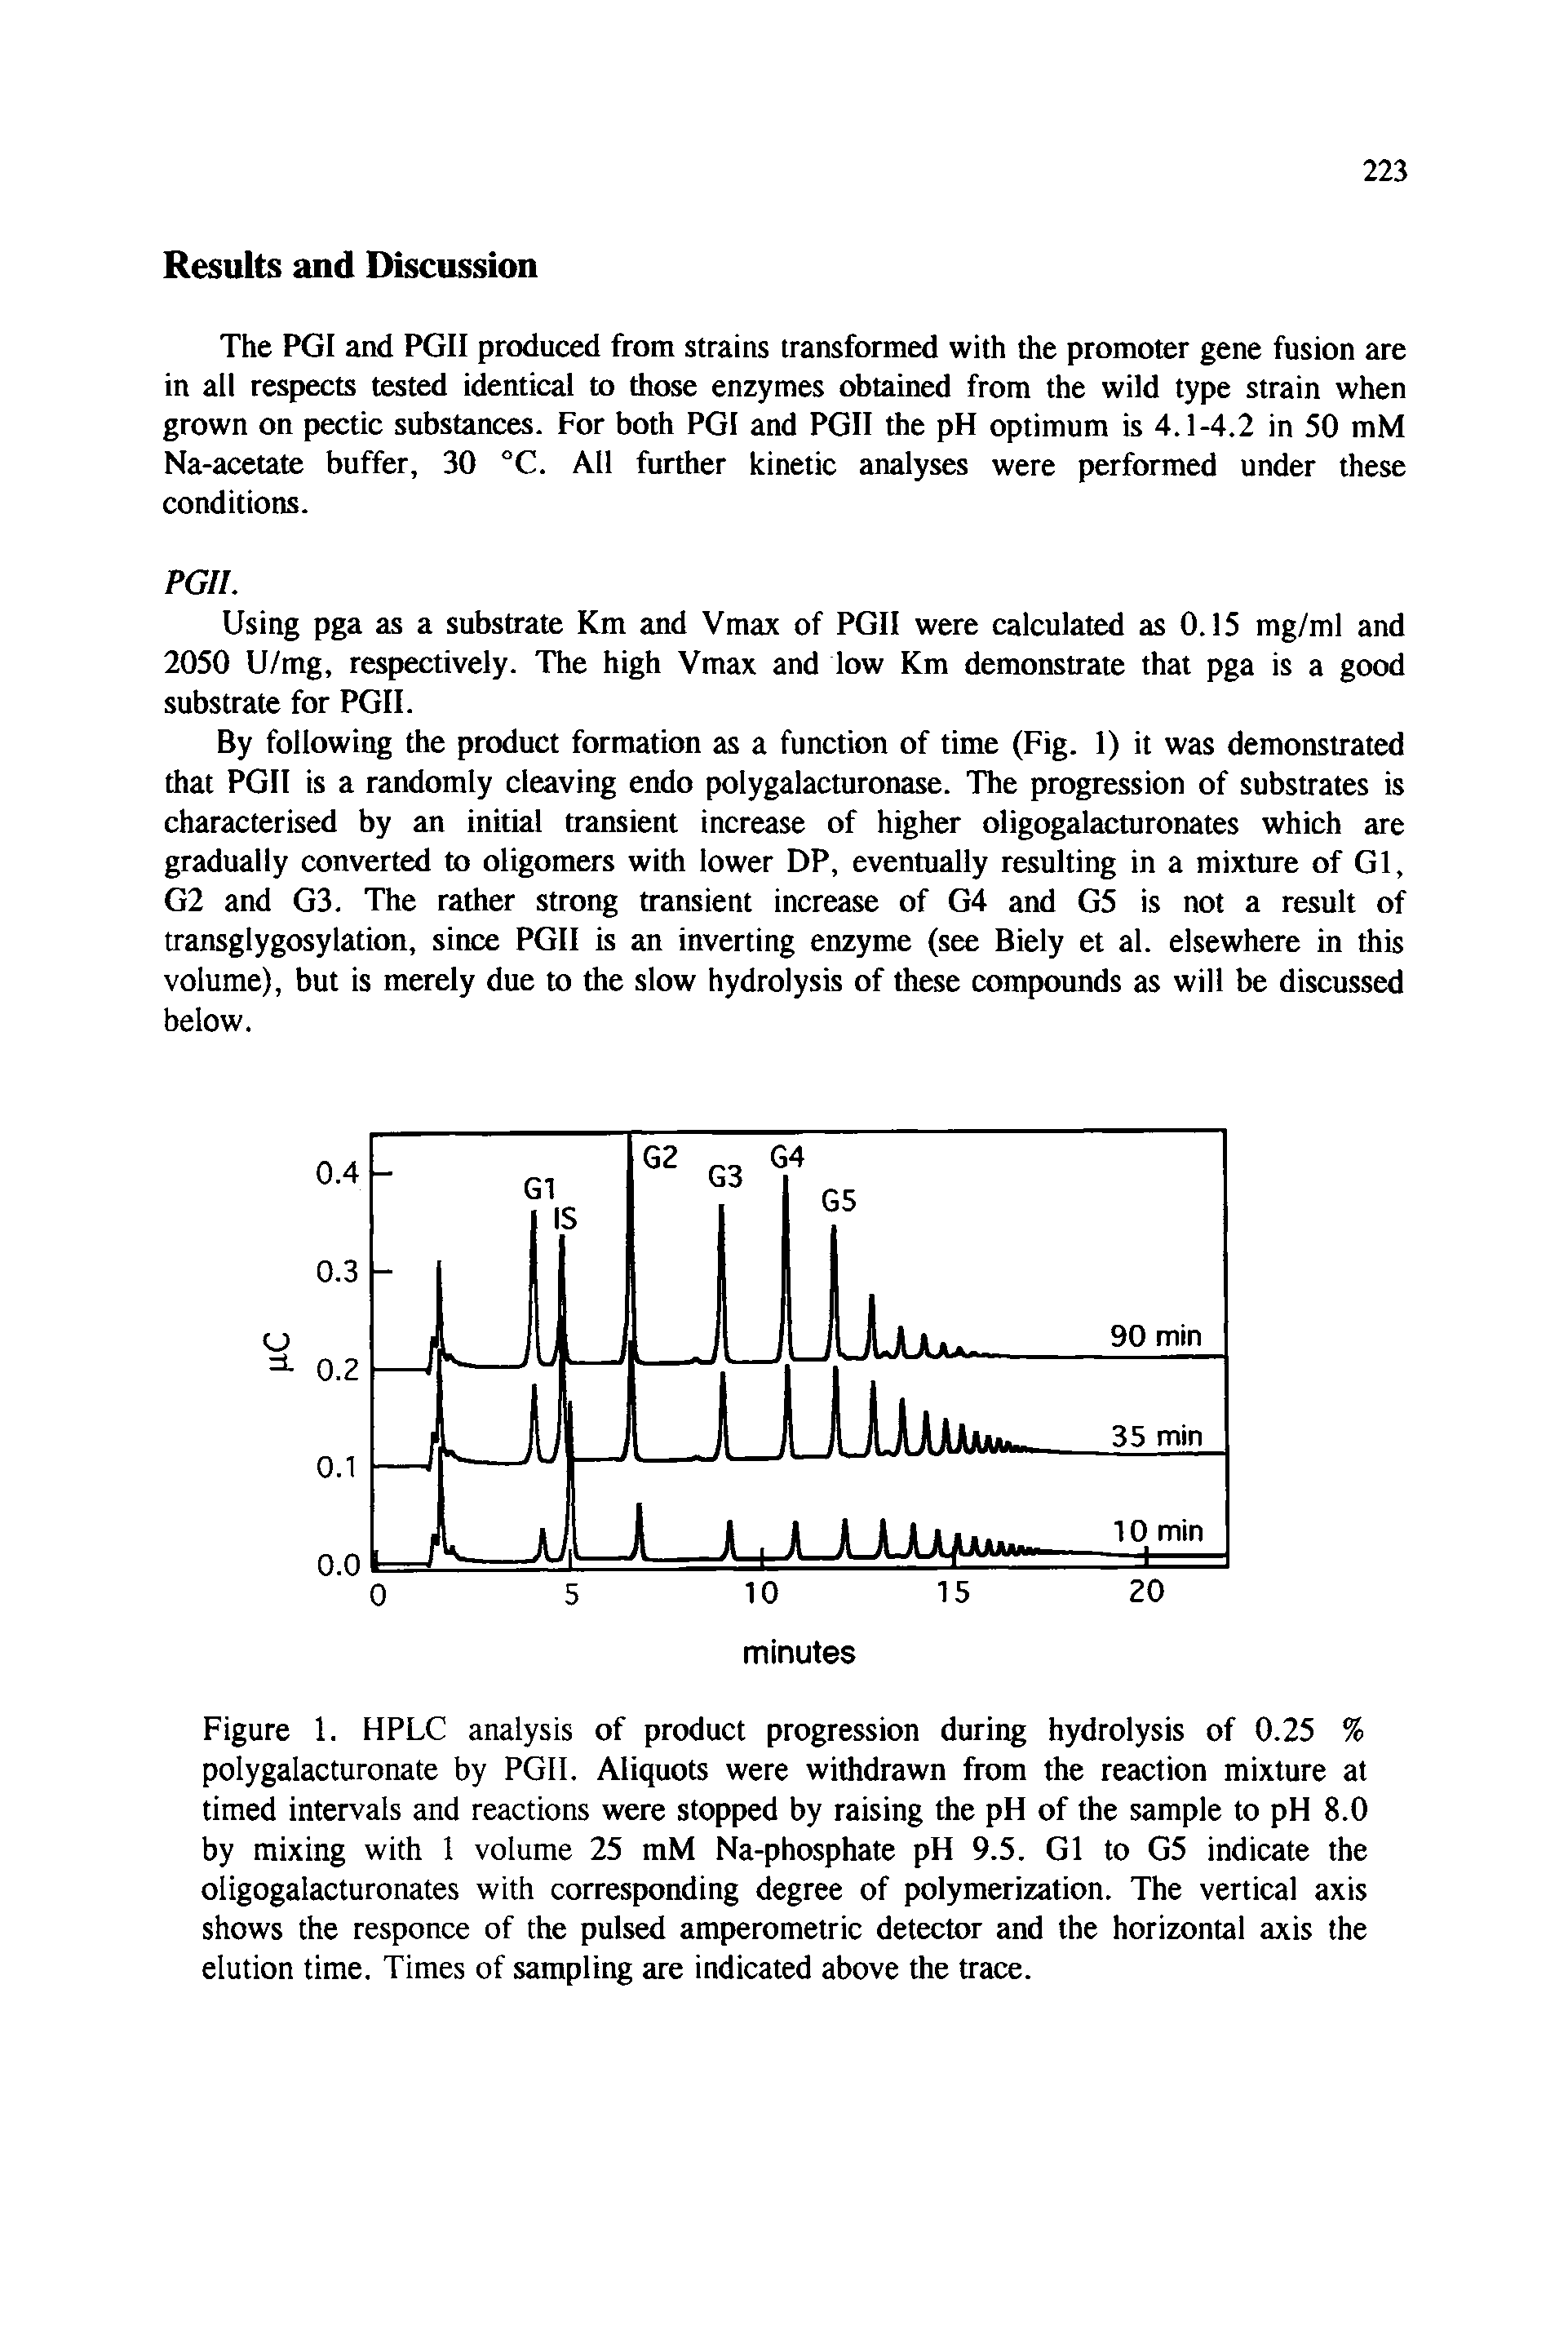 Figure 1. HPLC analysis of product progression during hydrolysis of 0.25 % polygalacturonate by PGII. Aliquots were withdrawn from the reaction mixture at timed intervals and reactions were stopped by raising the pH of the sample to pH 8.0 by mixing with 1 volume 25 mM Na-phosphate pH 9.5. Gl to G5 indicate the oligogalacturonates with corresponding degree of polymerization. The vertical axis shows the responce of the pulsed amperometric detector and the horizontal axis the elution time. Times of sampling are indicated above the trace.